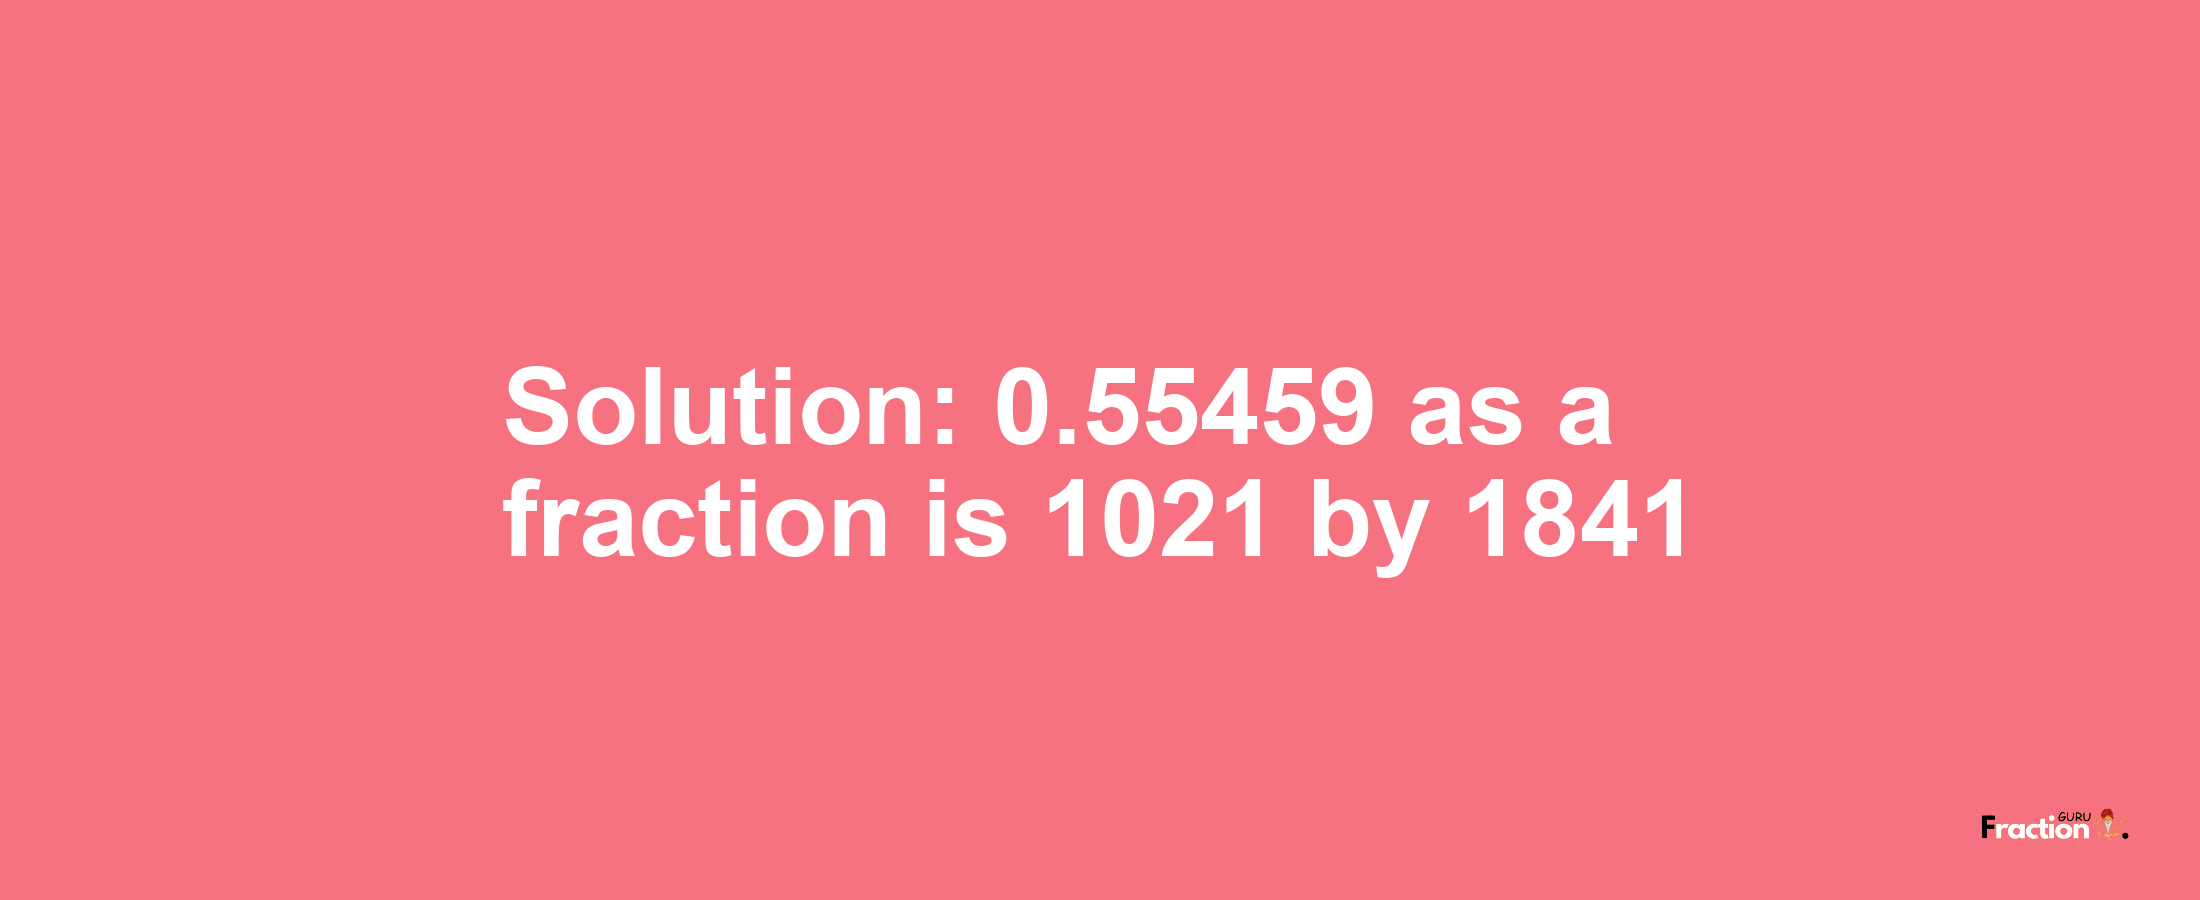 Solution:0.55459 as a fraction is 1021/1841